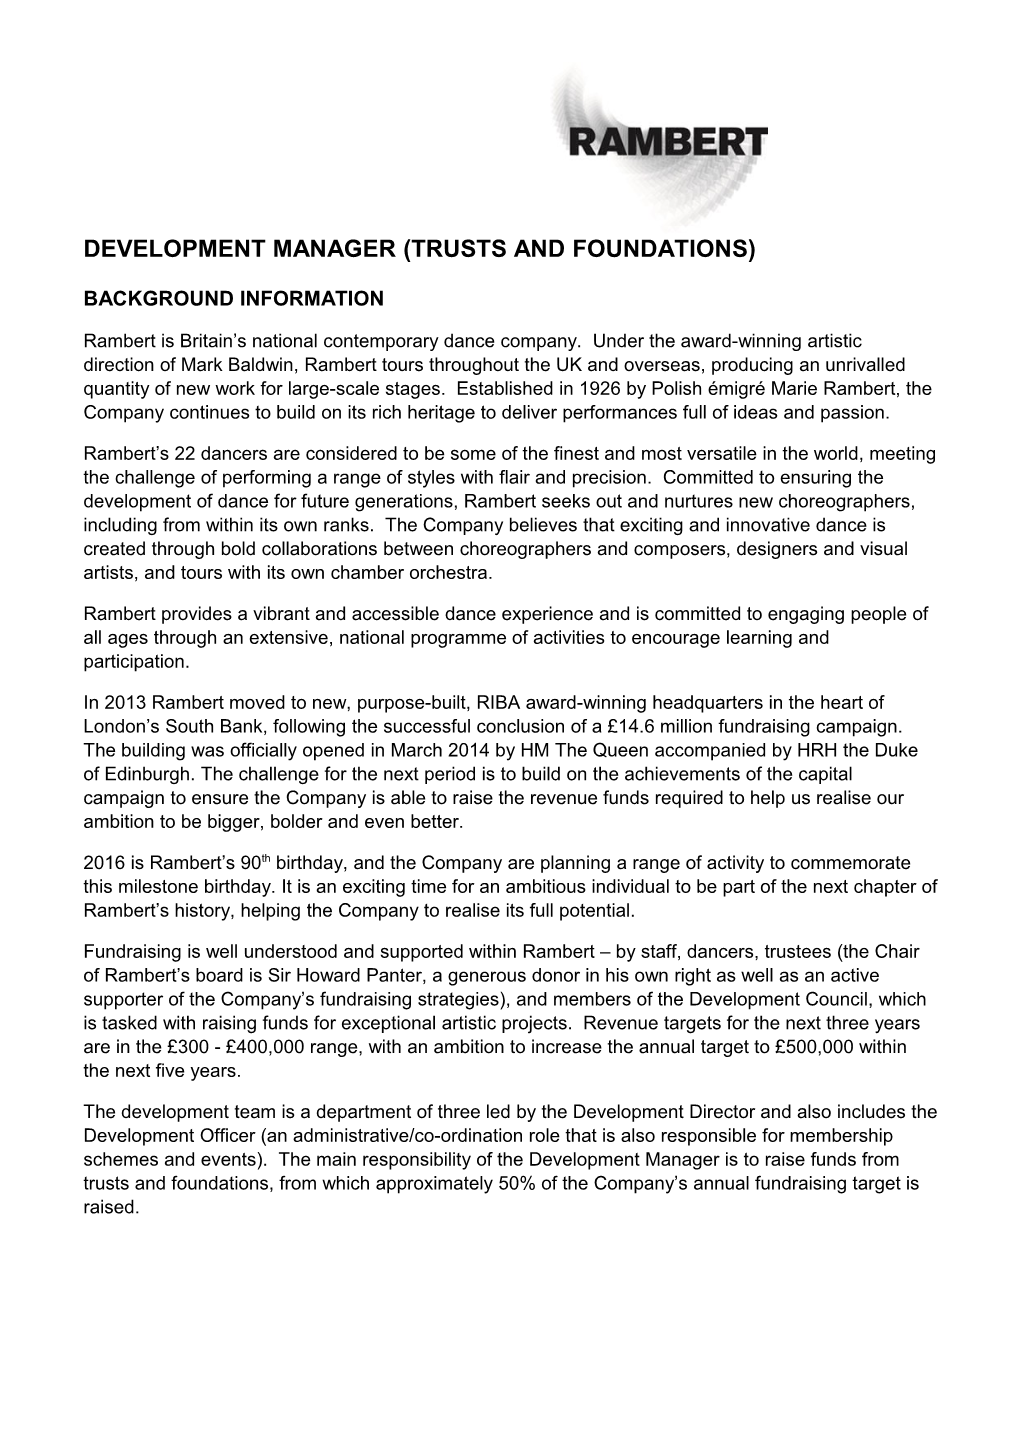 Development Manager (Trusts and Foundations)